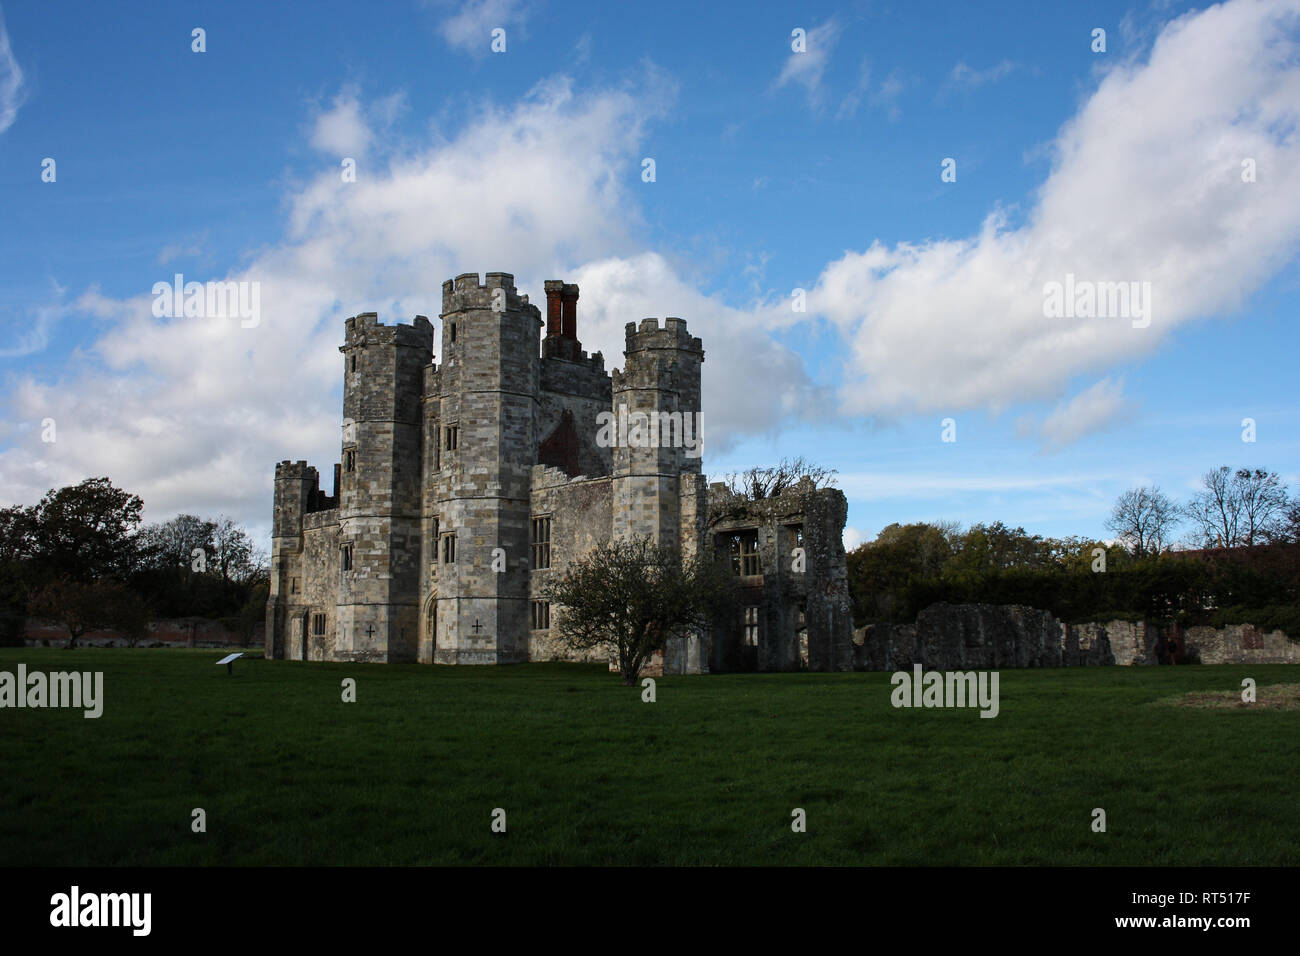 Titchfield Abbey is a medieval abbey and later country house, located in the village of Titchfield near Fareham in Hampshire, England. Stock Photo